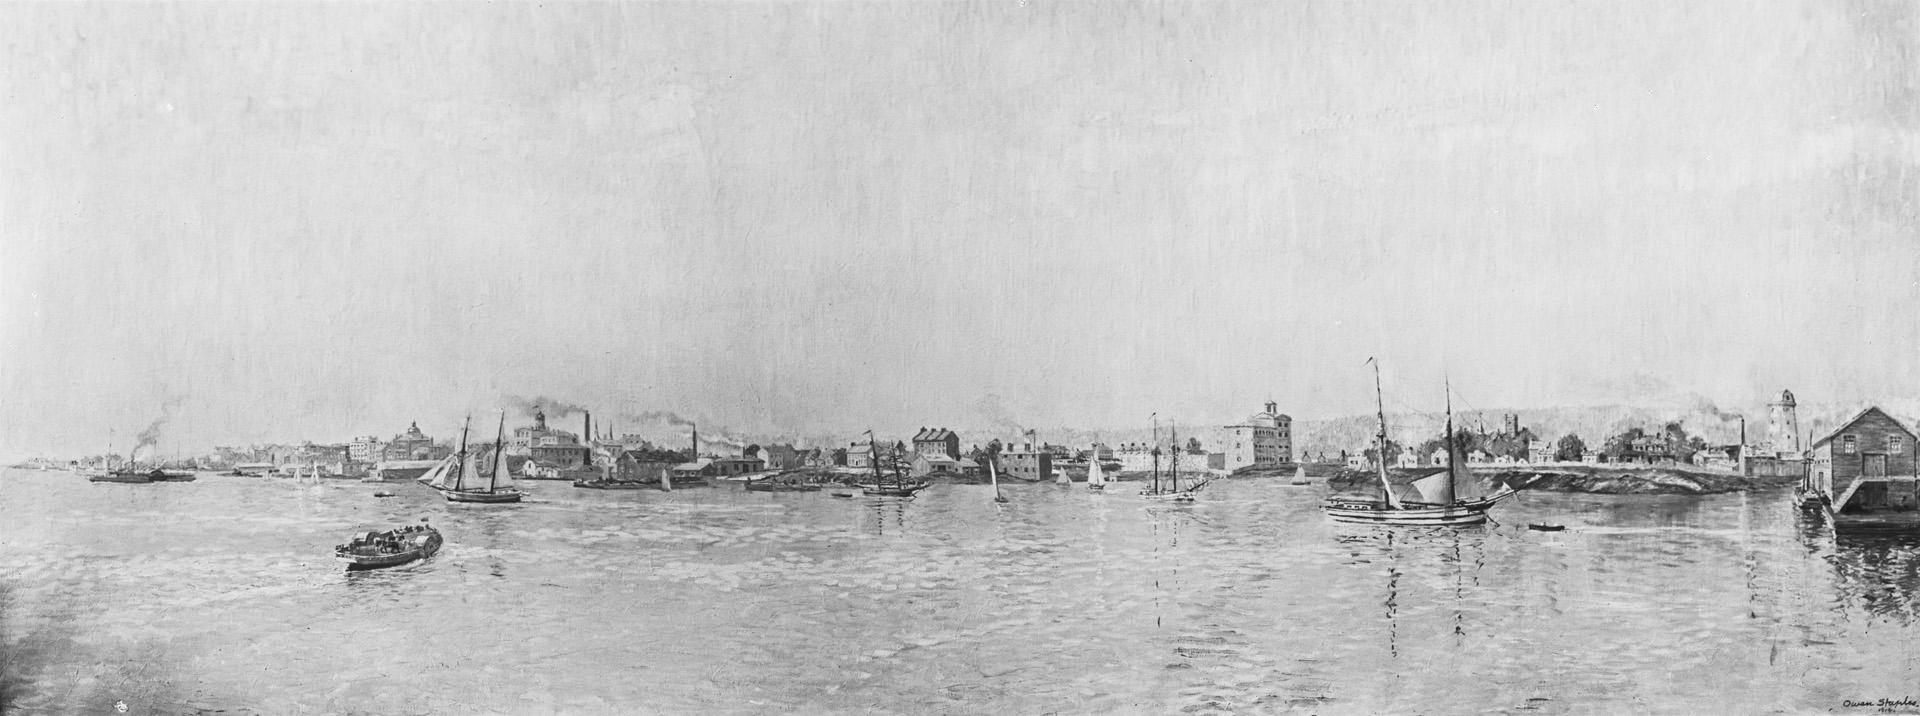 Toronto Harbour 1849, looking west from Gooderham wharf, west of Trinity St